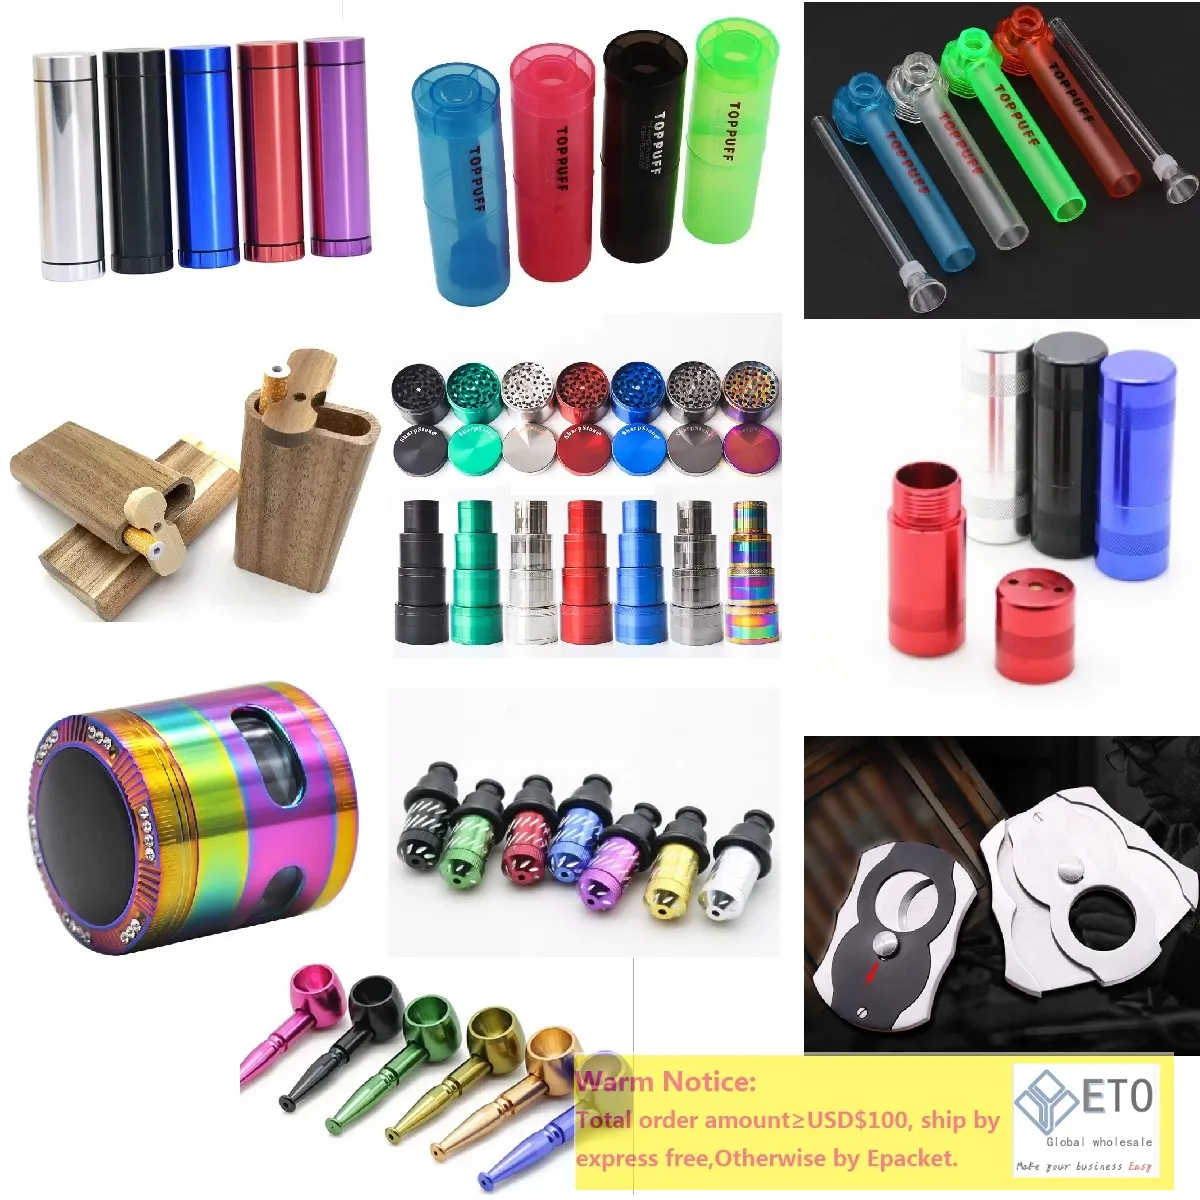 water pipe 4.33inch Automatic Ejection Dugout with grinder Round Stash Storage Metal Container case Tobacco Cigarette Herbal Cigar Grinder Cigar Cutter